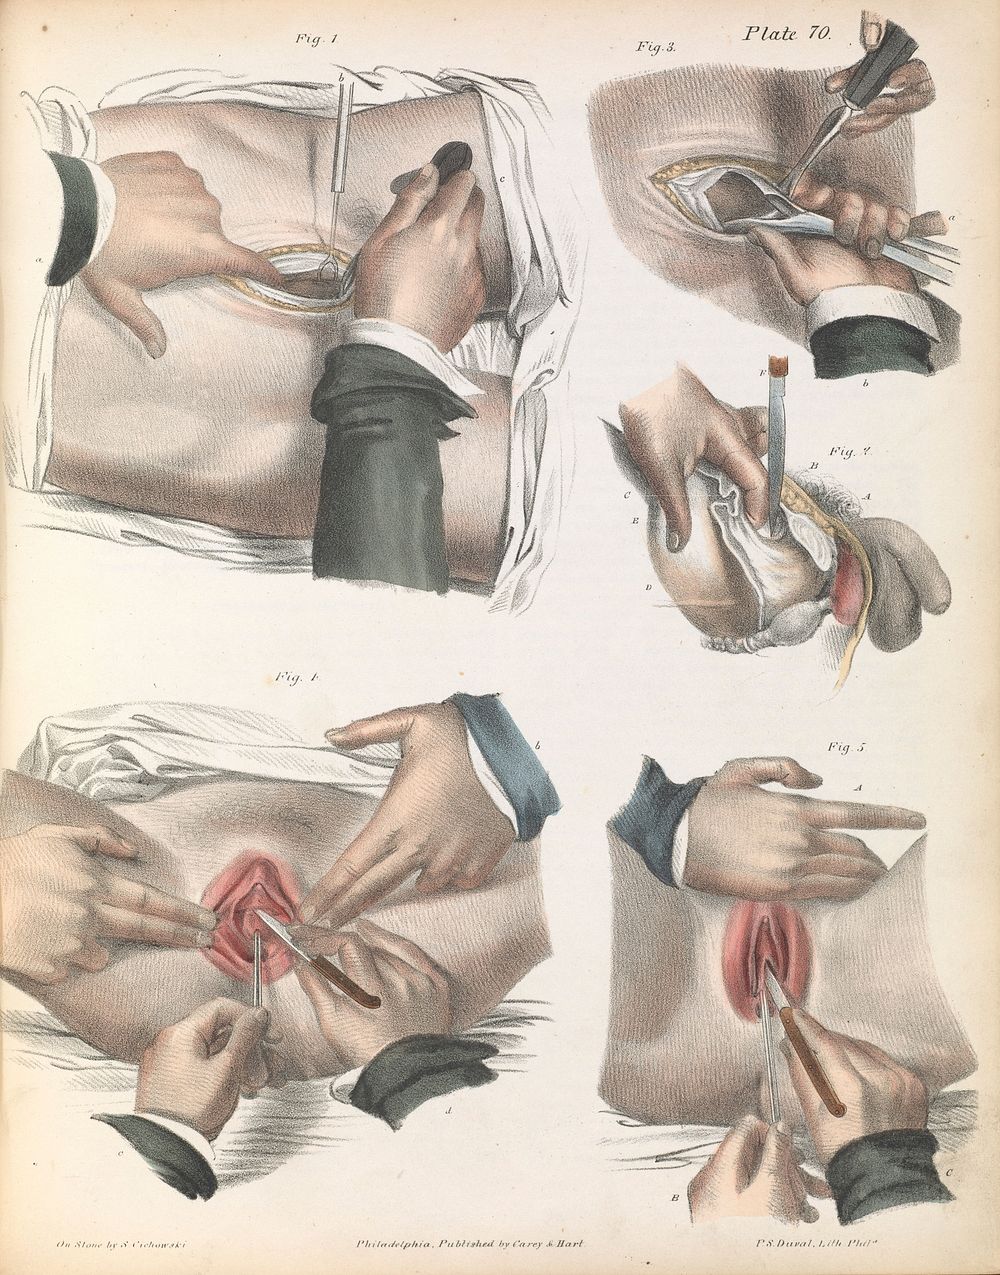 Plate LXX. Surgical technique for lithotomy.